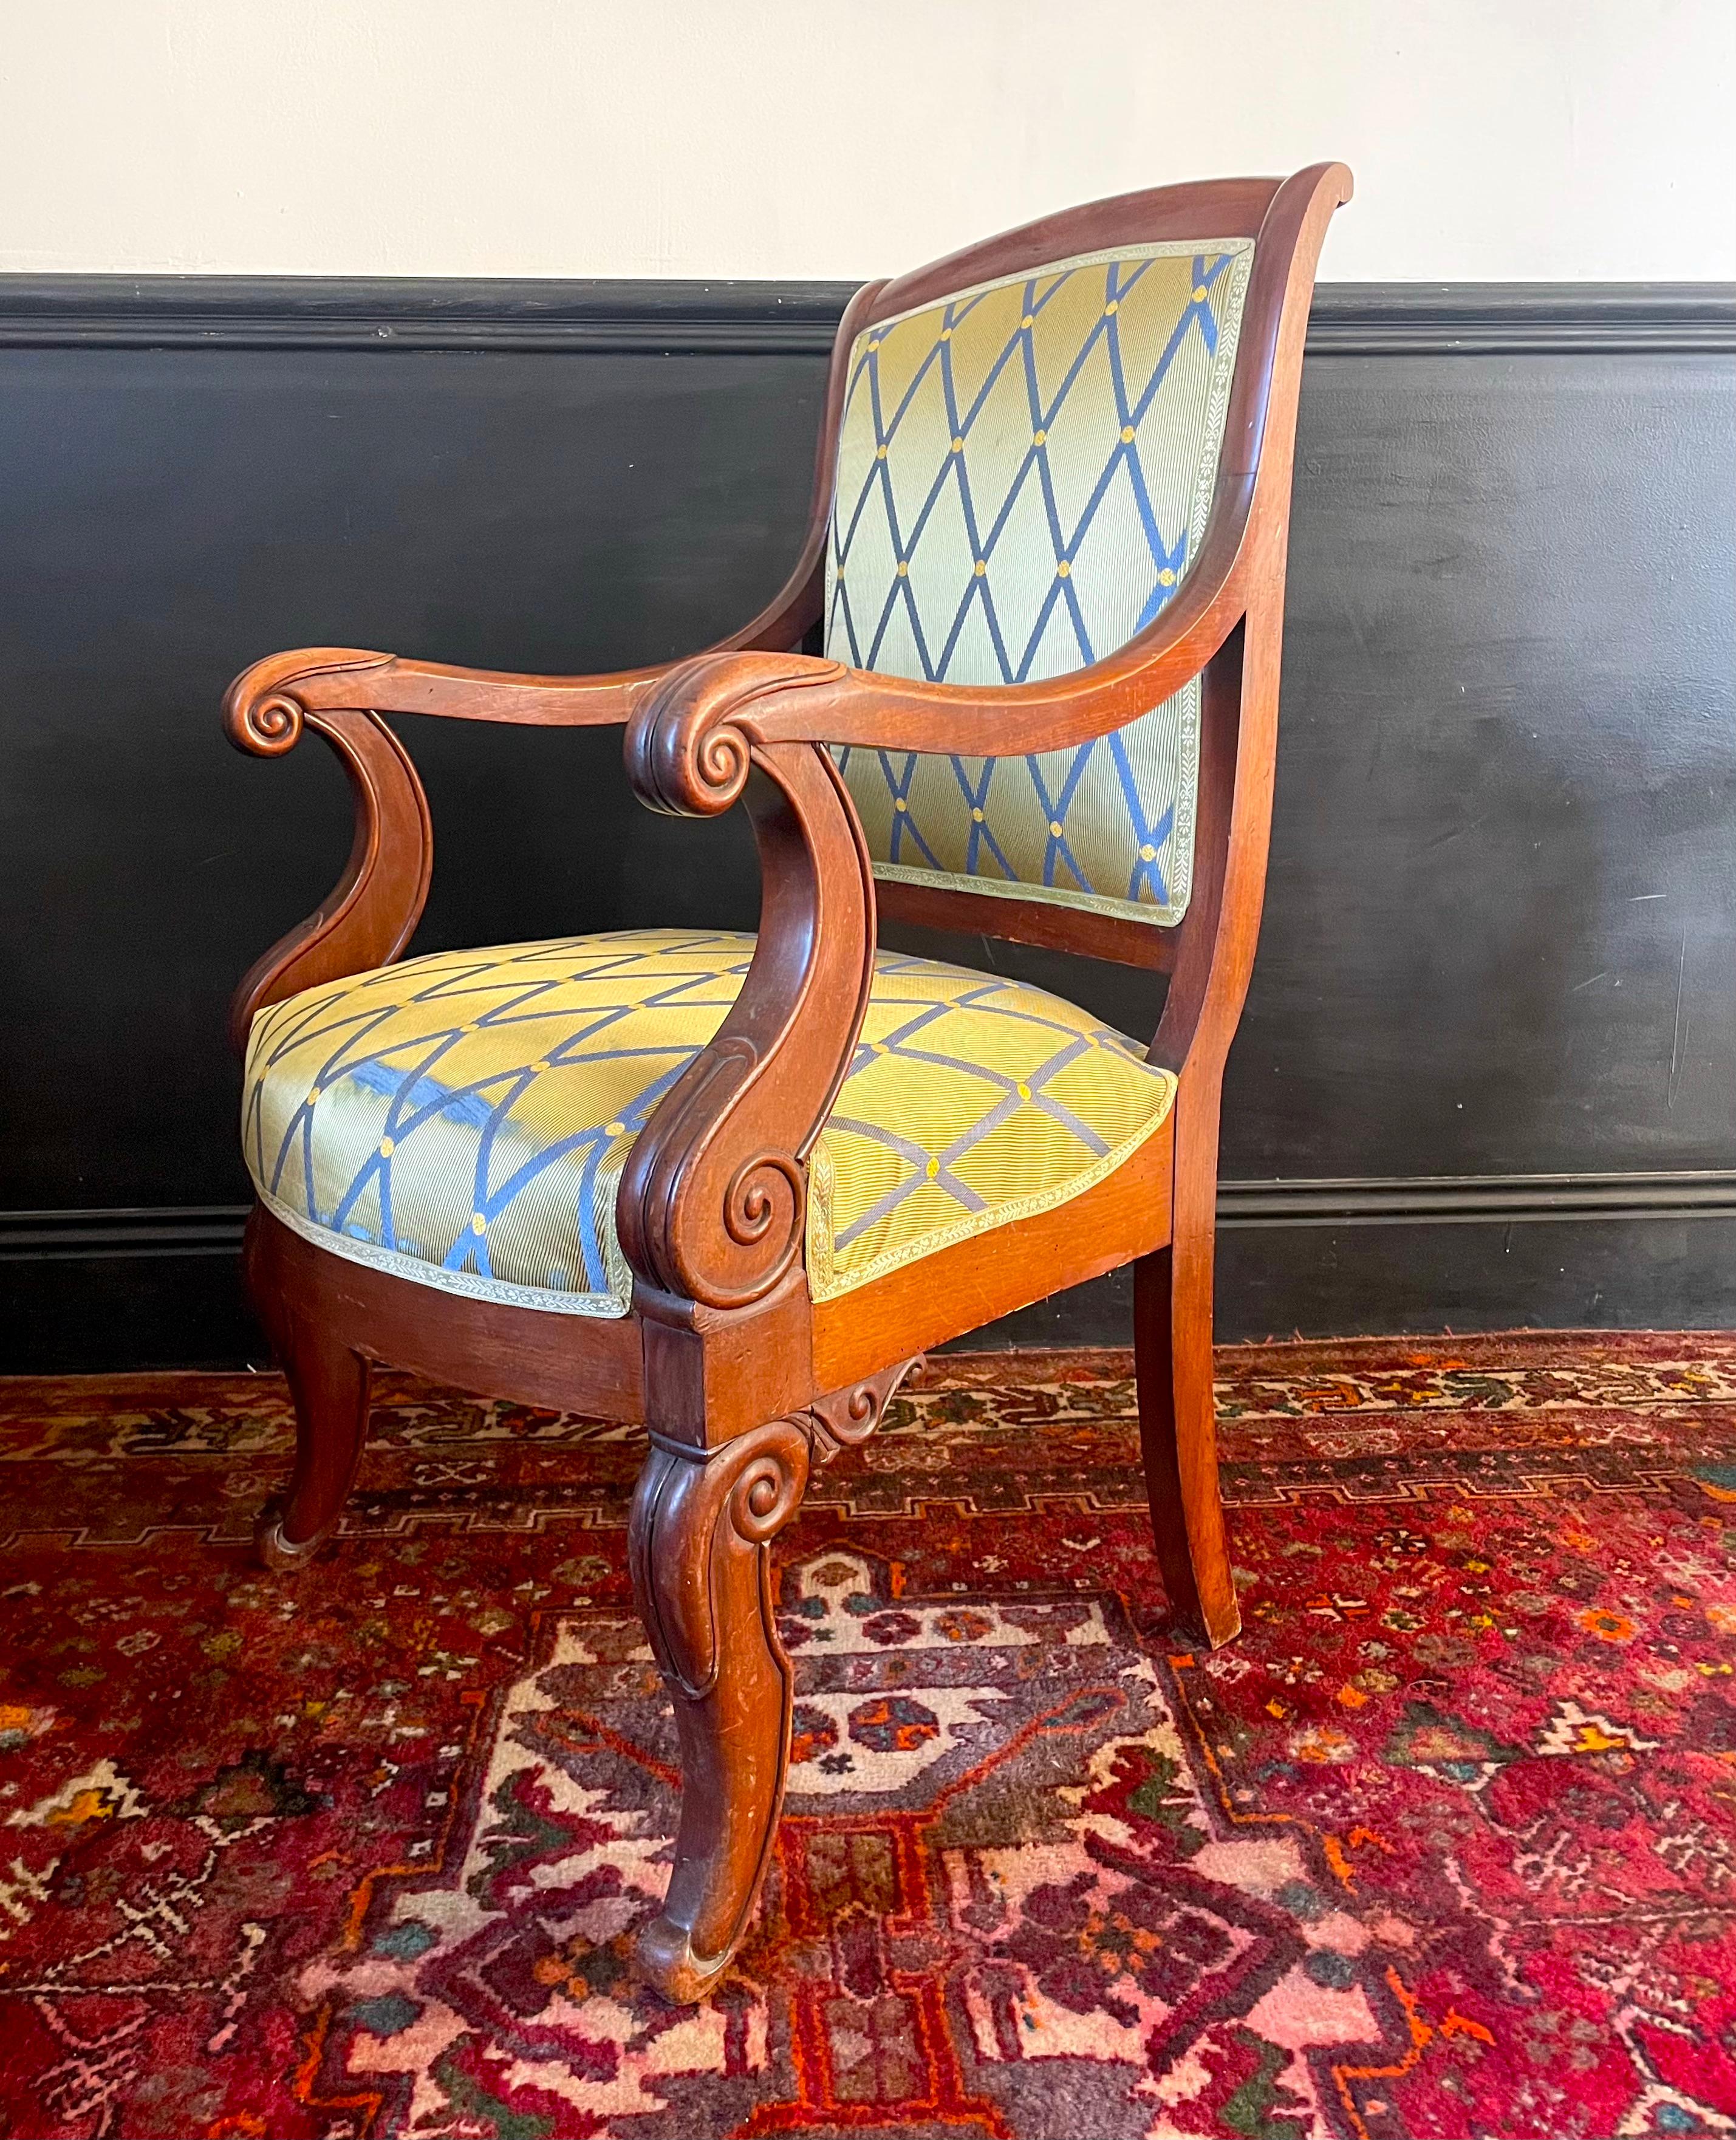 Set of 4 Restoration armchairs. around 1820.
Mahogany.
Beautiful golden patina.
Rolling armrests that end in scrolls.
Console front legs.
Rear saber base.
Straight roll-up backrest.
carved wood
The seat upholstery is worn. The upholstery is in good